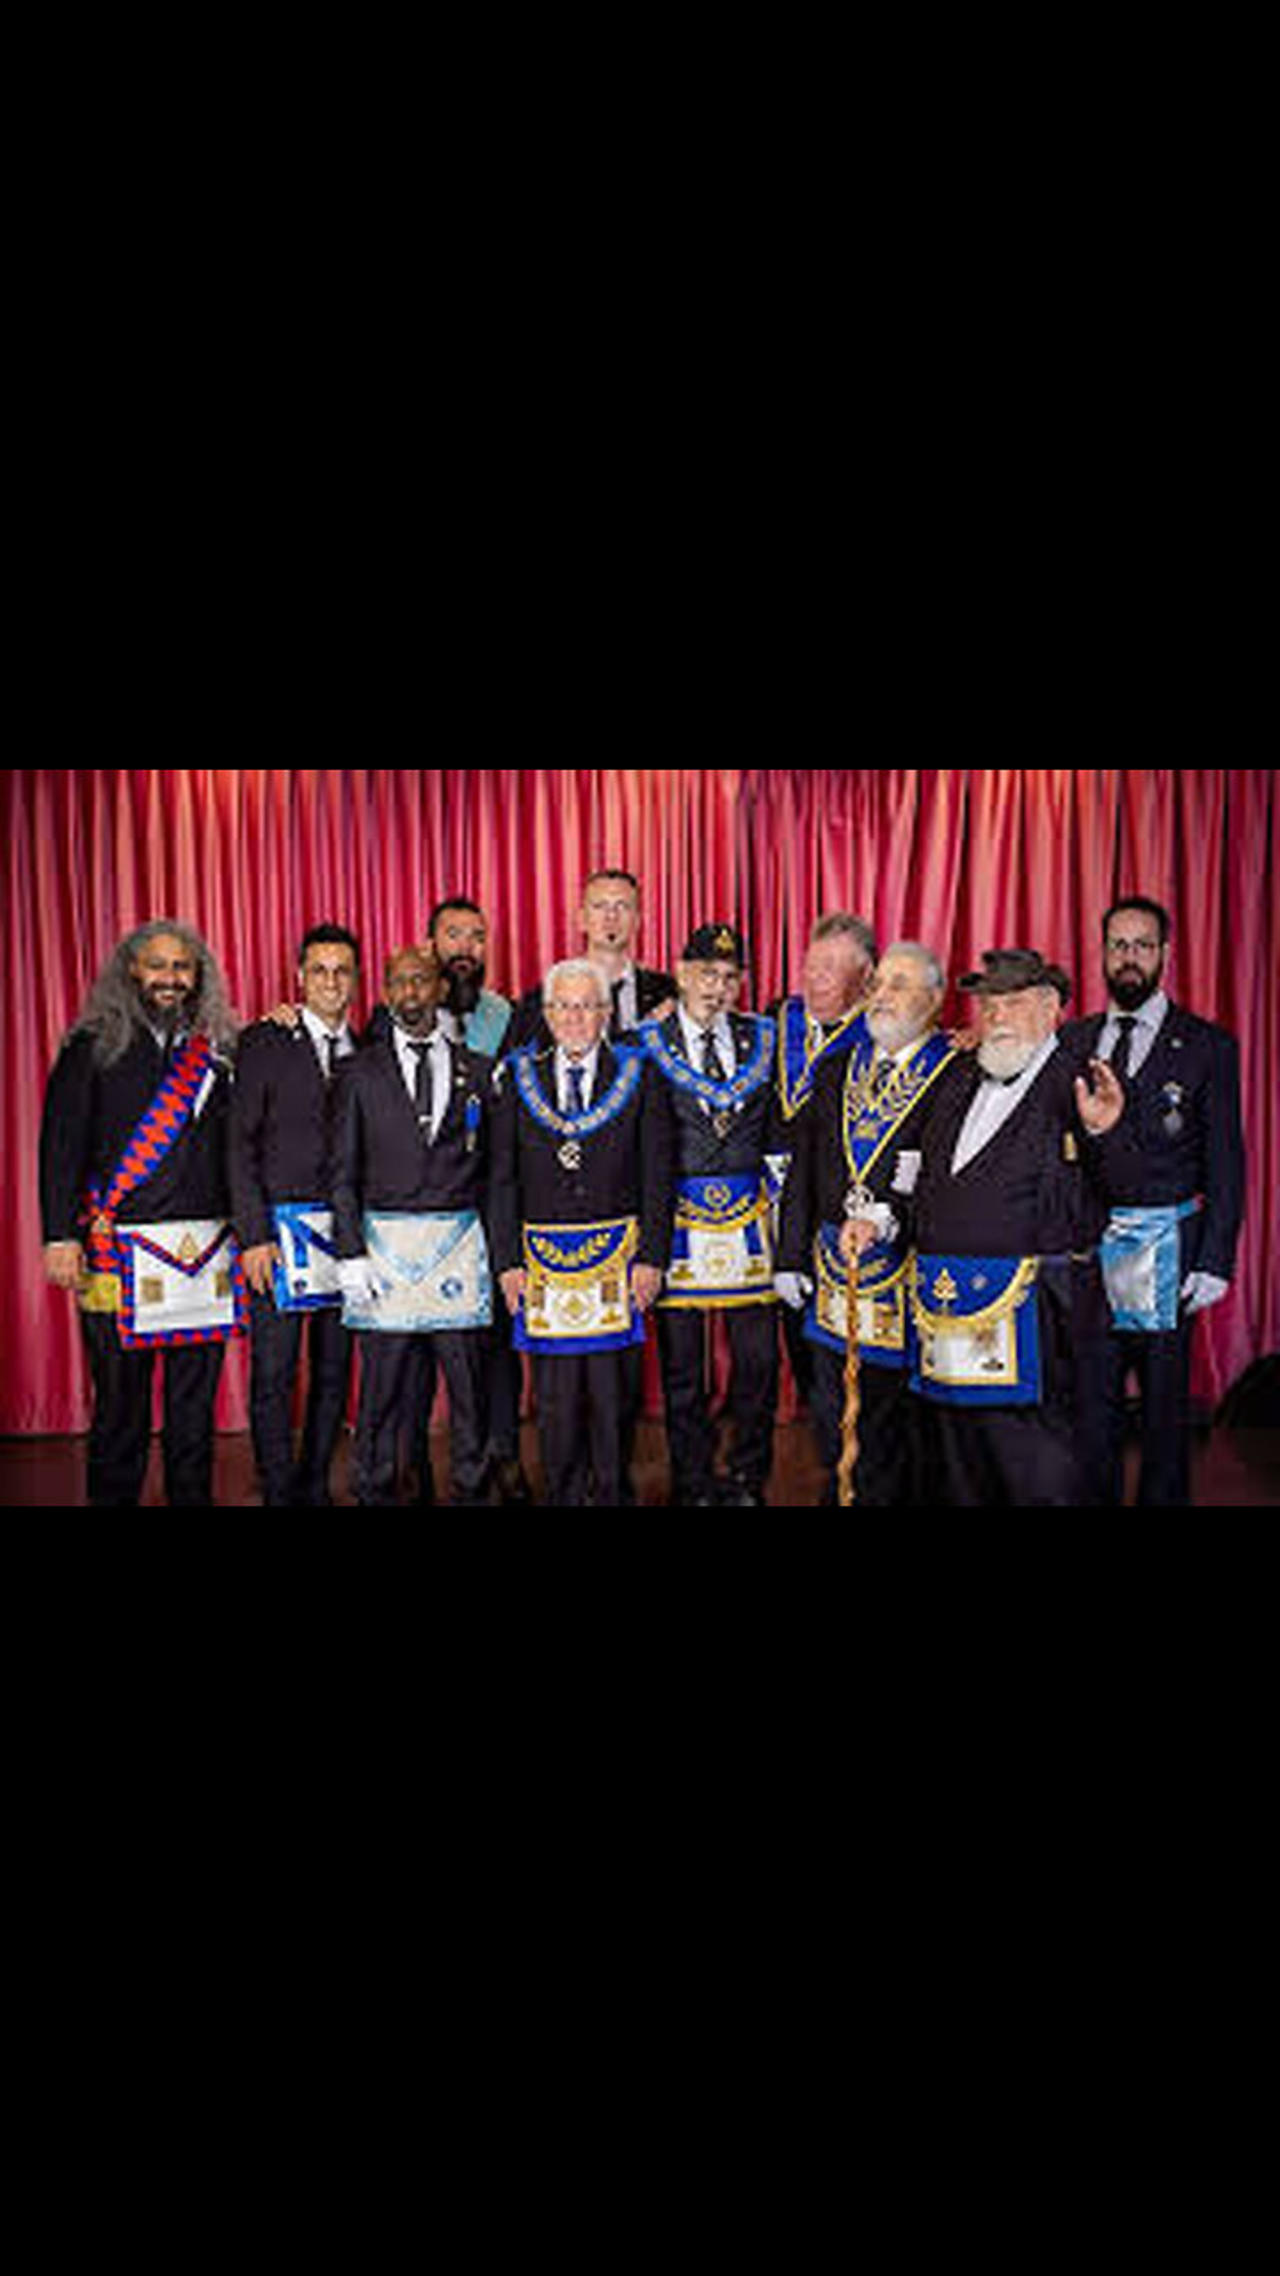 FREEMASONS - A belief in a supreme being and scripture is a condition of membership. Initiates should take their vows on that sc